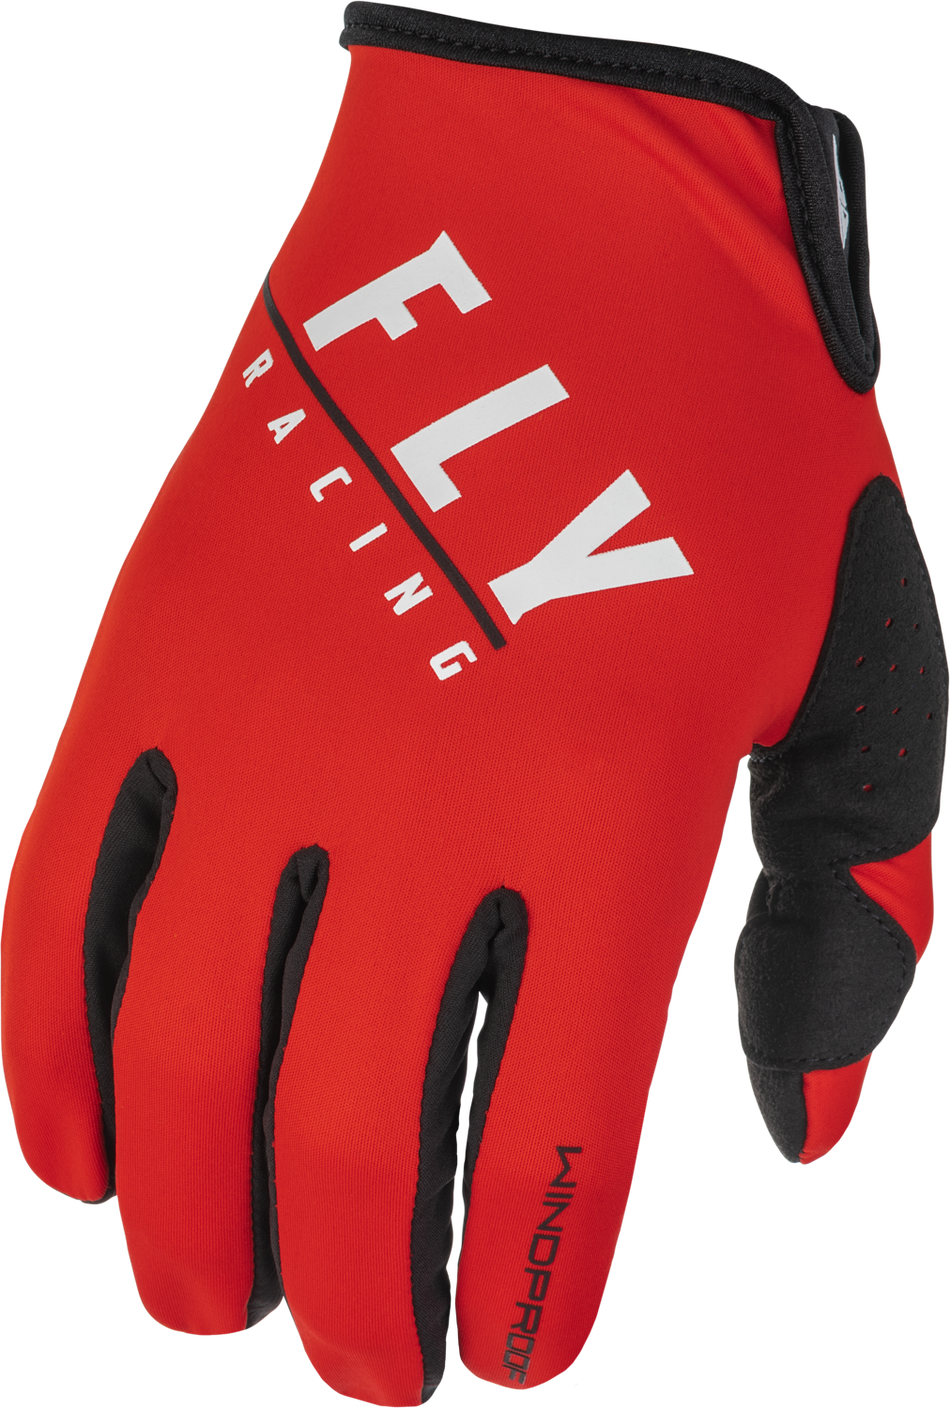 FLY RACING Windproof Gloves Black/Red Sz 13 371-14313